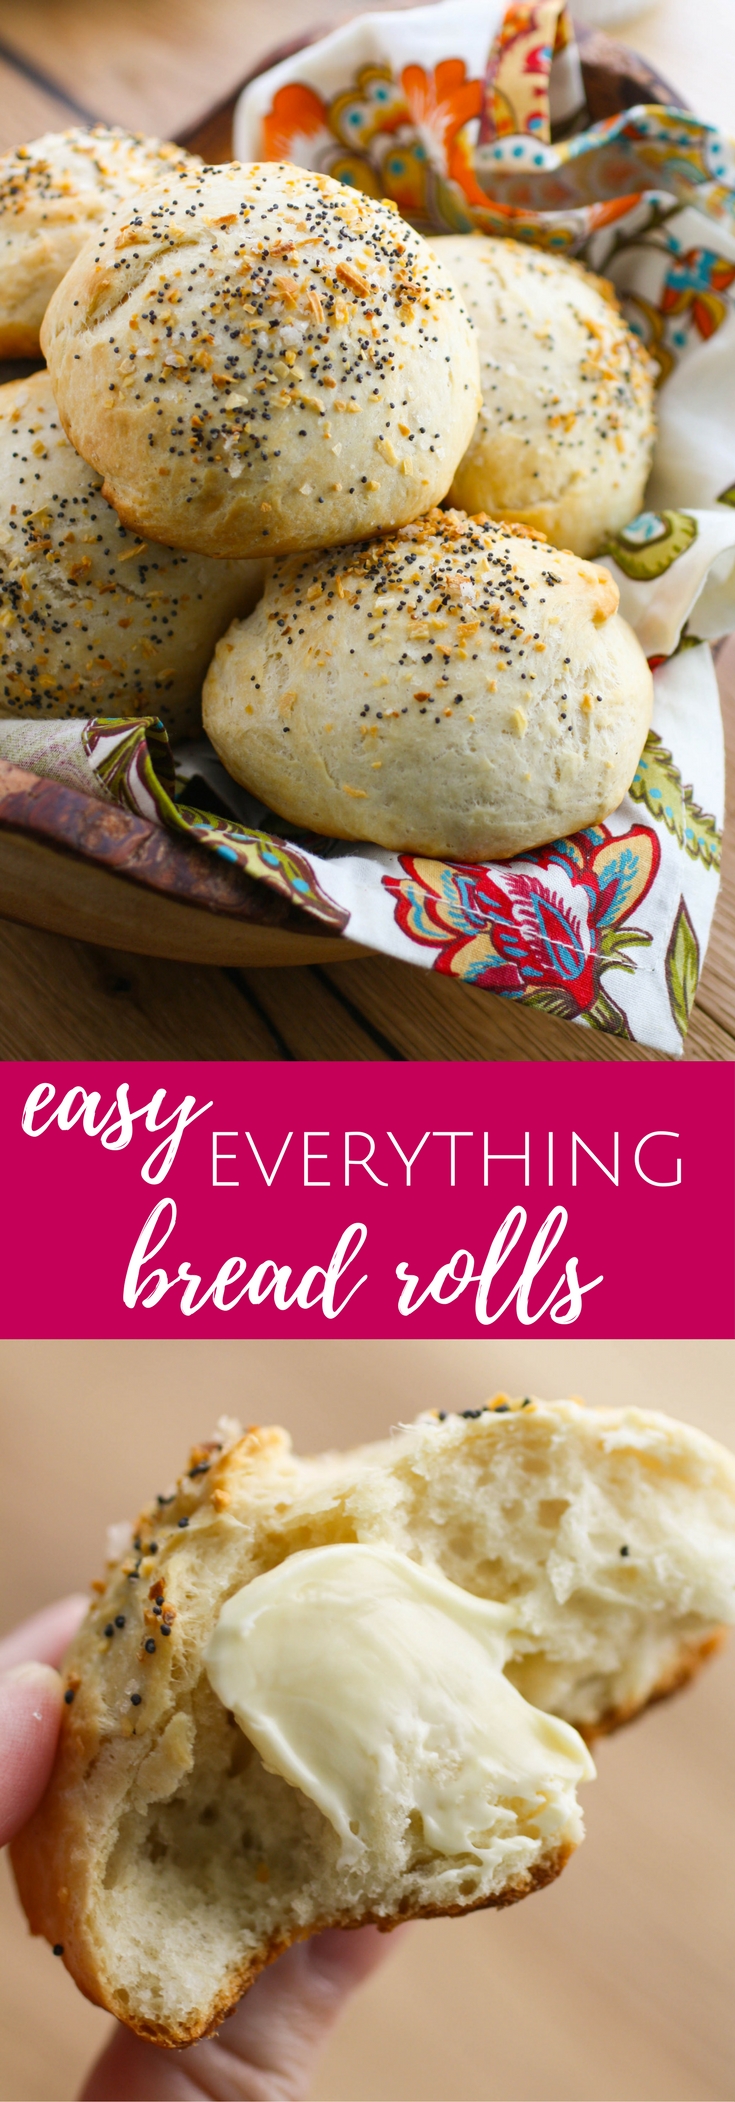 Easy Everything Bread Rolls are the bread rolls you've been looking for! These homemade rolls are a delight, and easy to make, too.